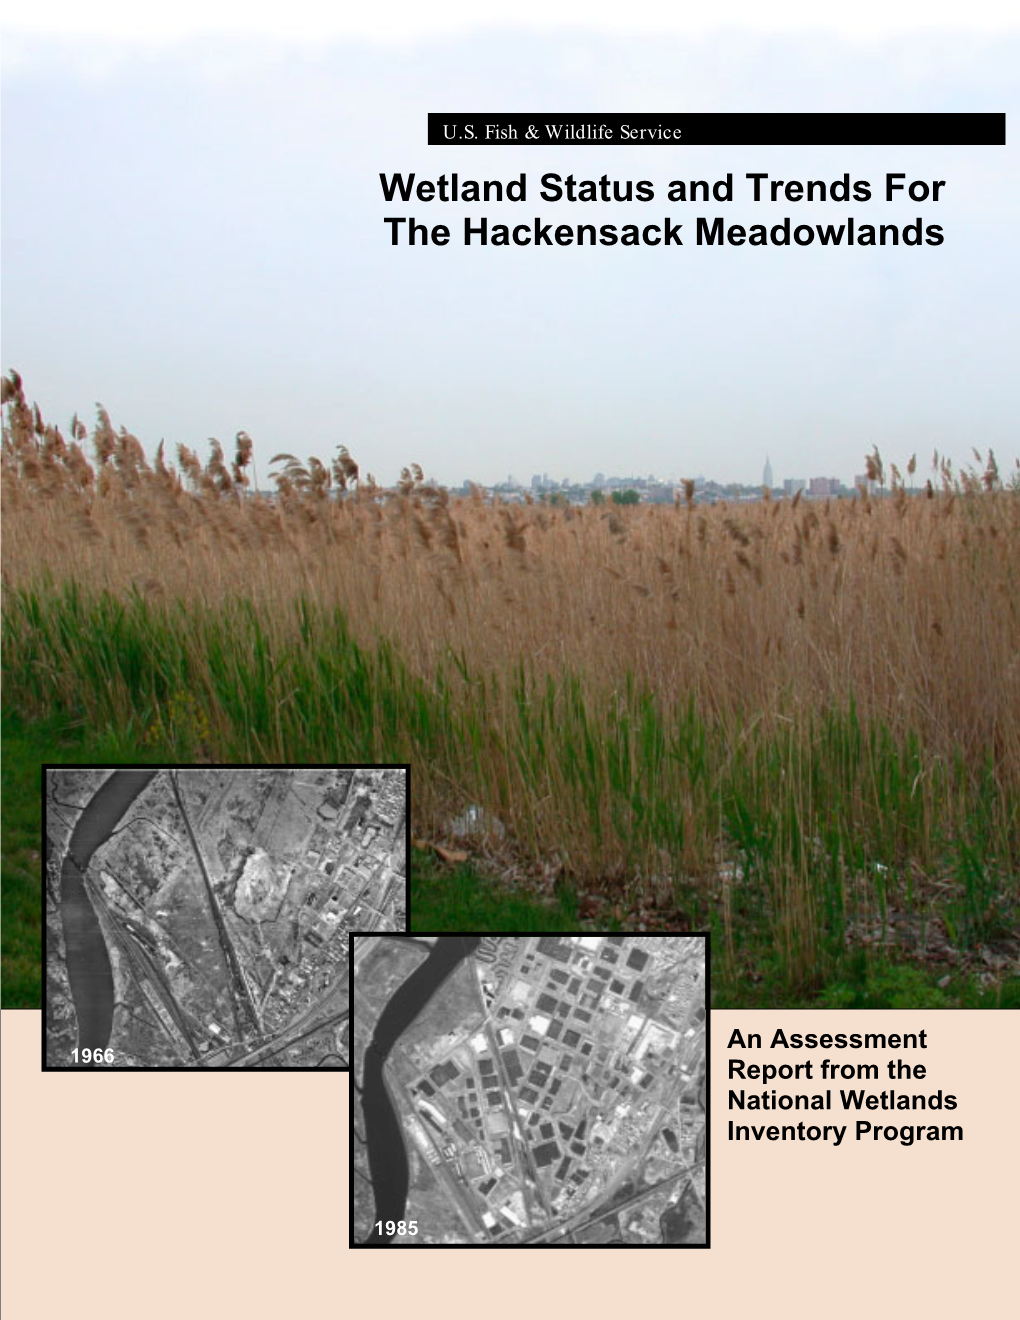 Wetland Status and Trends for the Hackensack Meadowlands